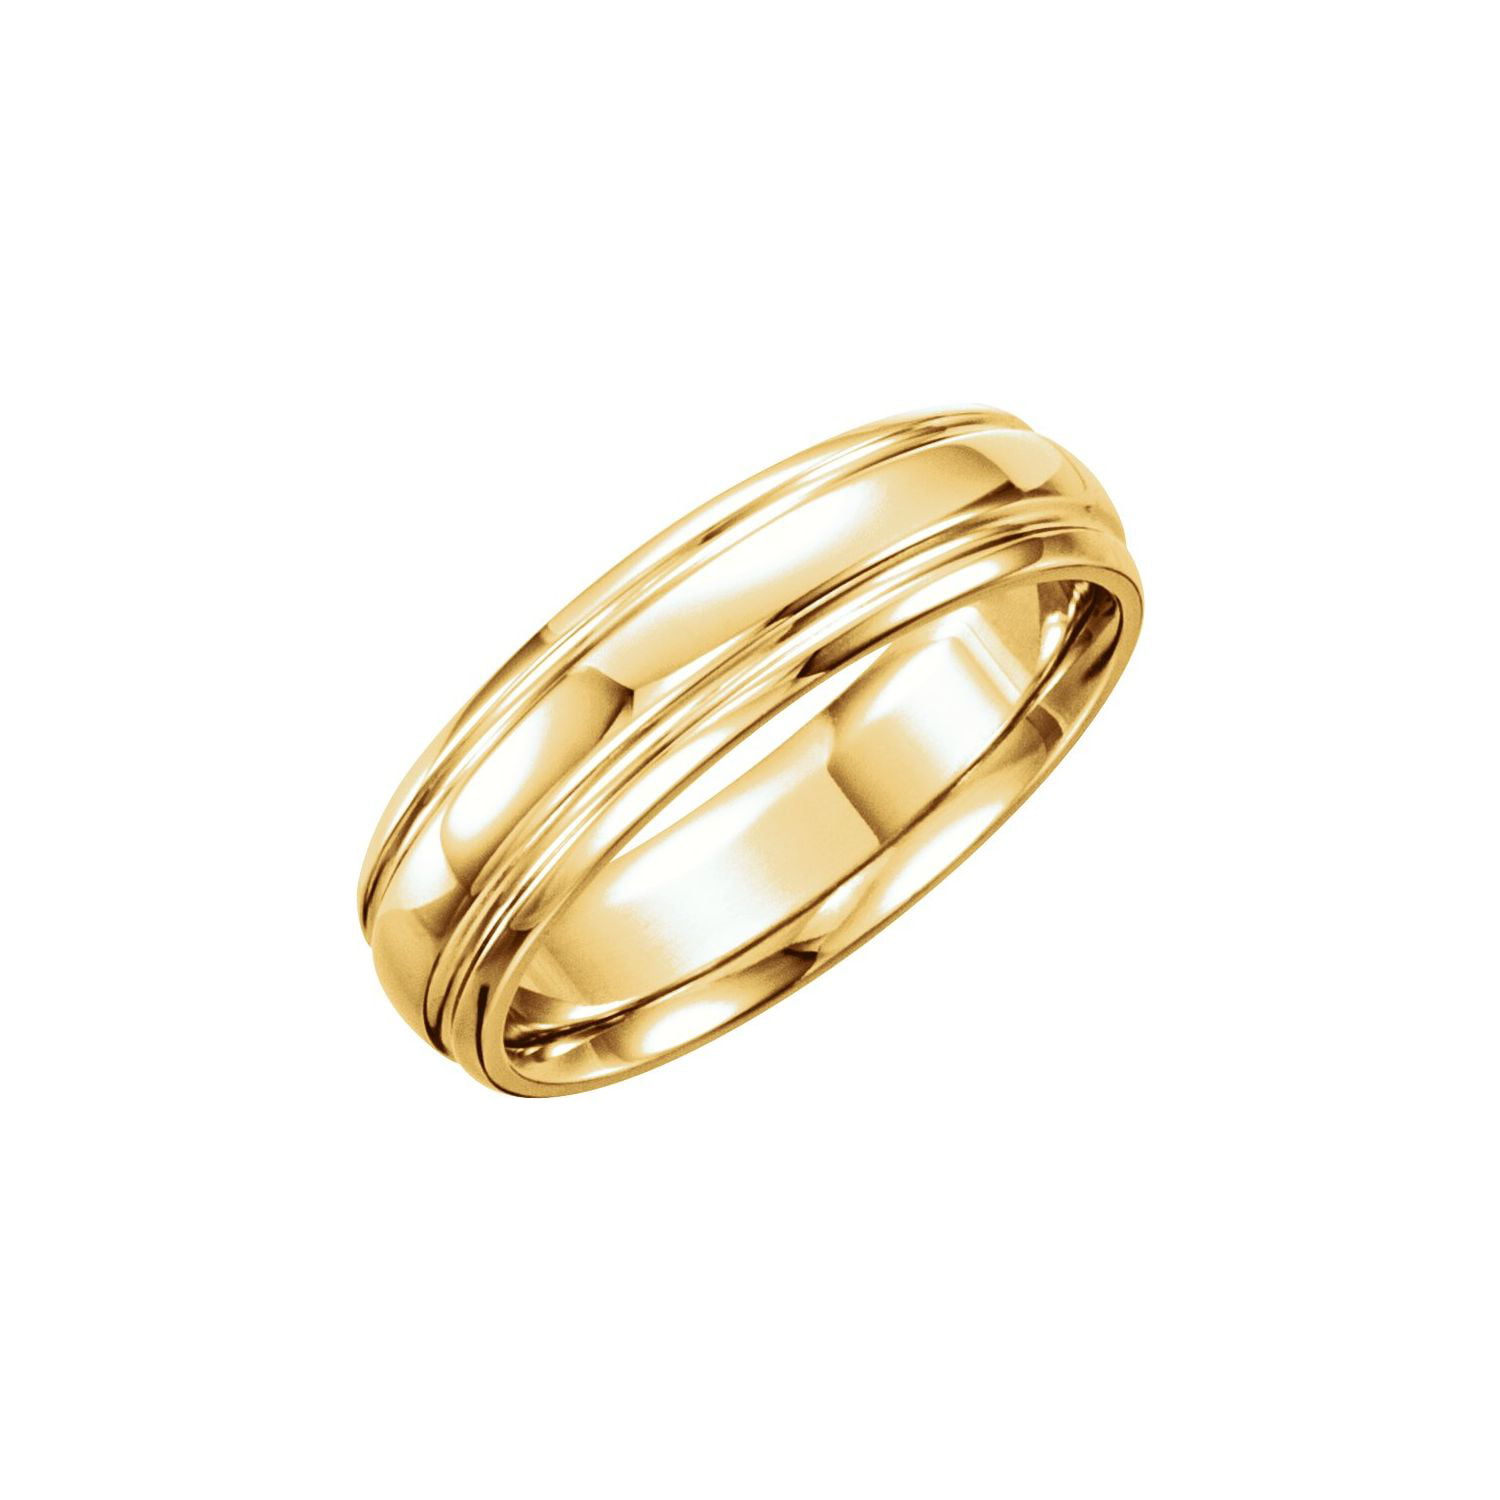 Diamond2Deal 14k Yellow Gold 6 mm Grooved Wedding Band